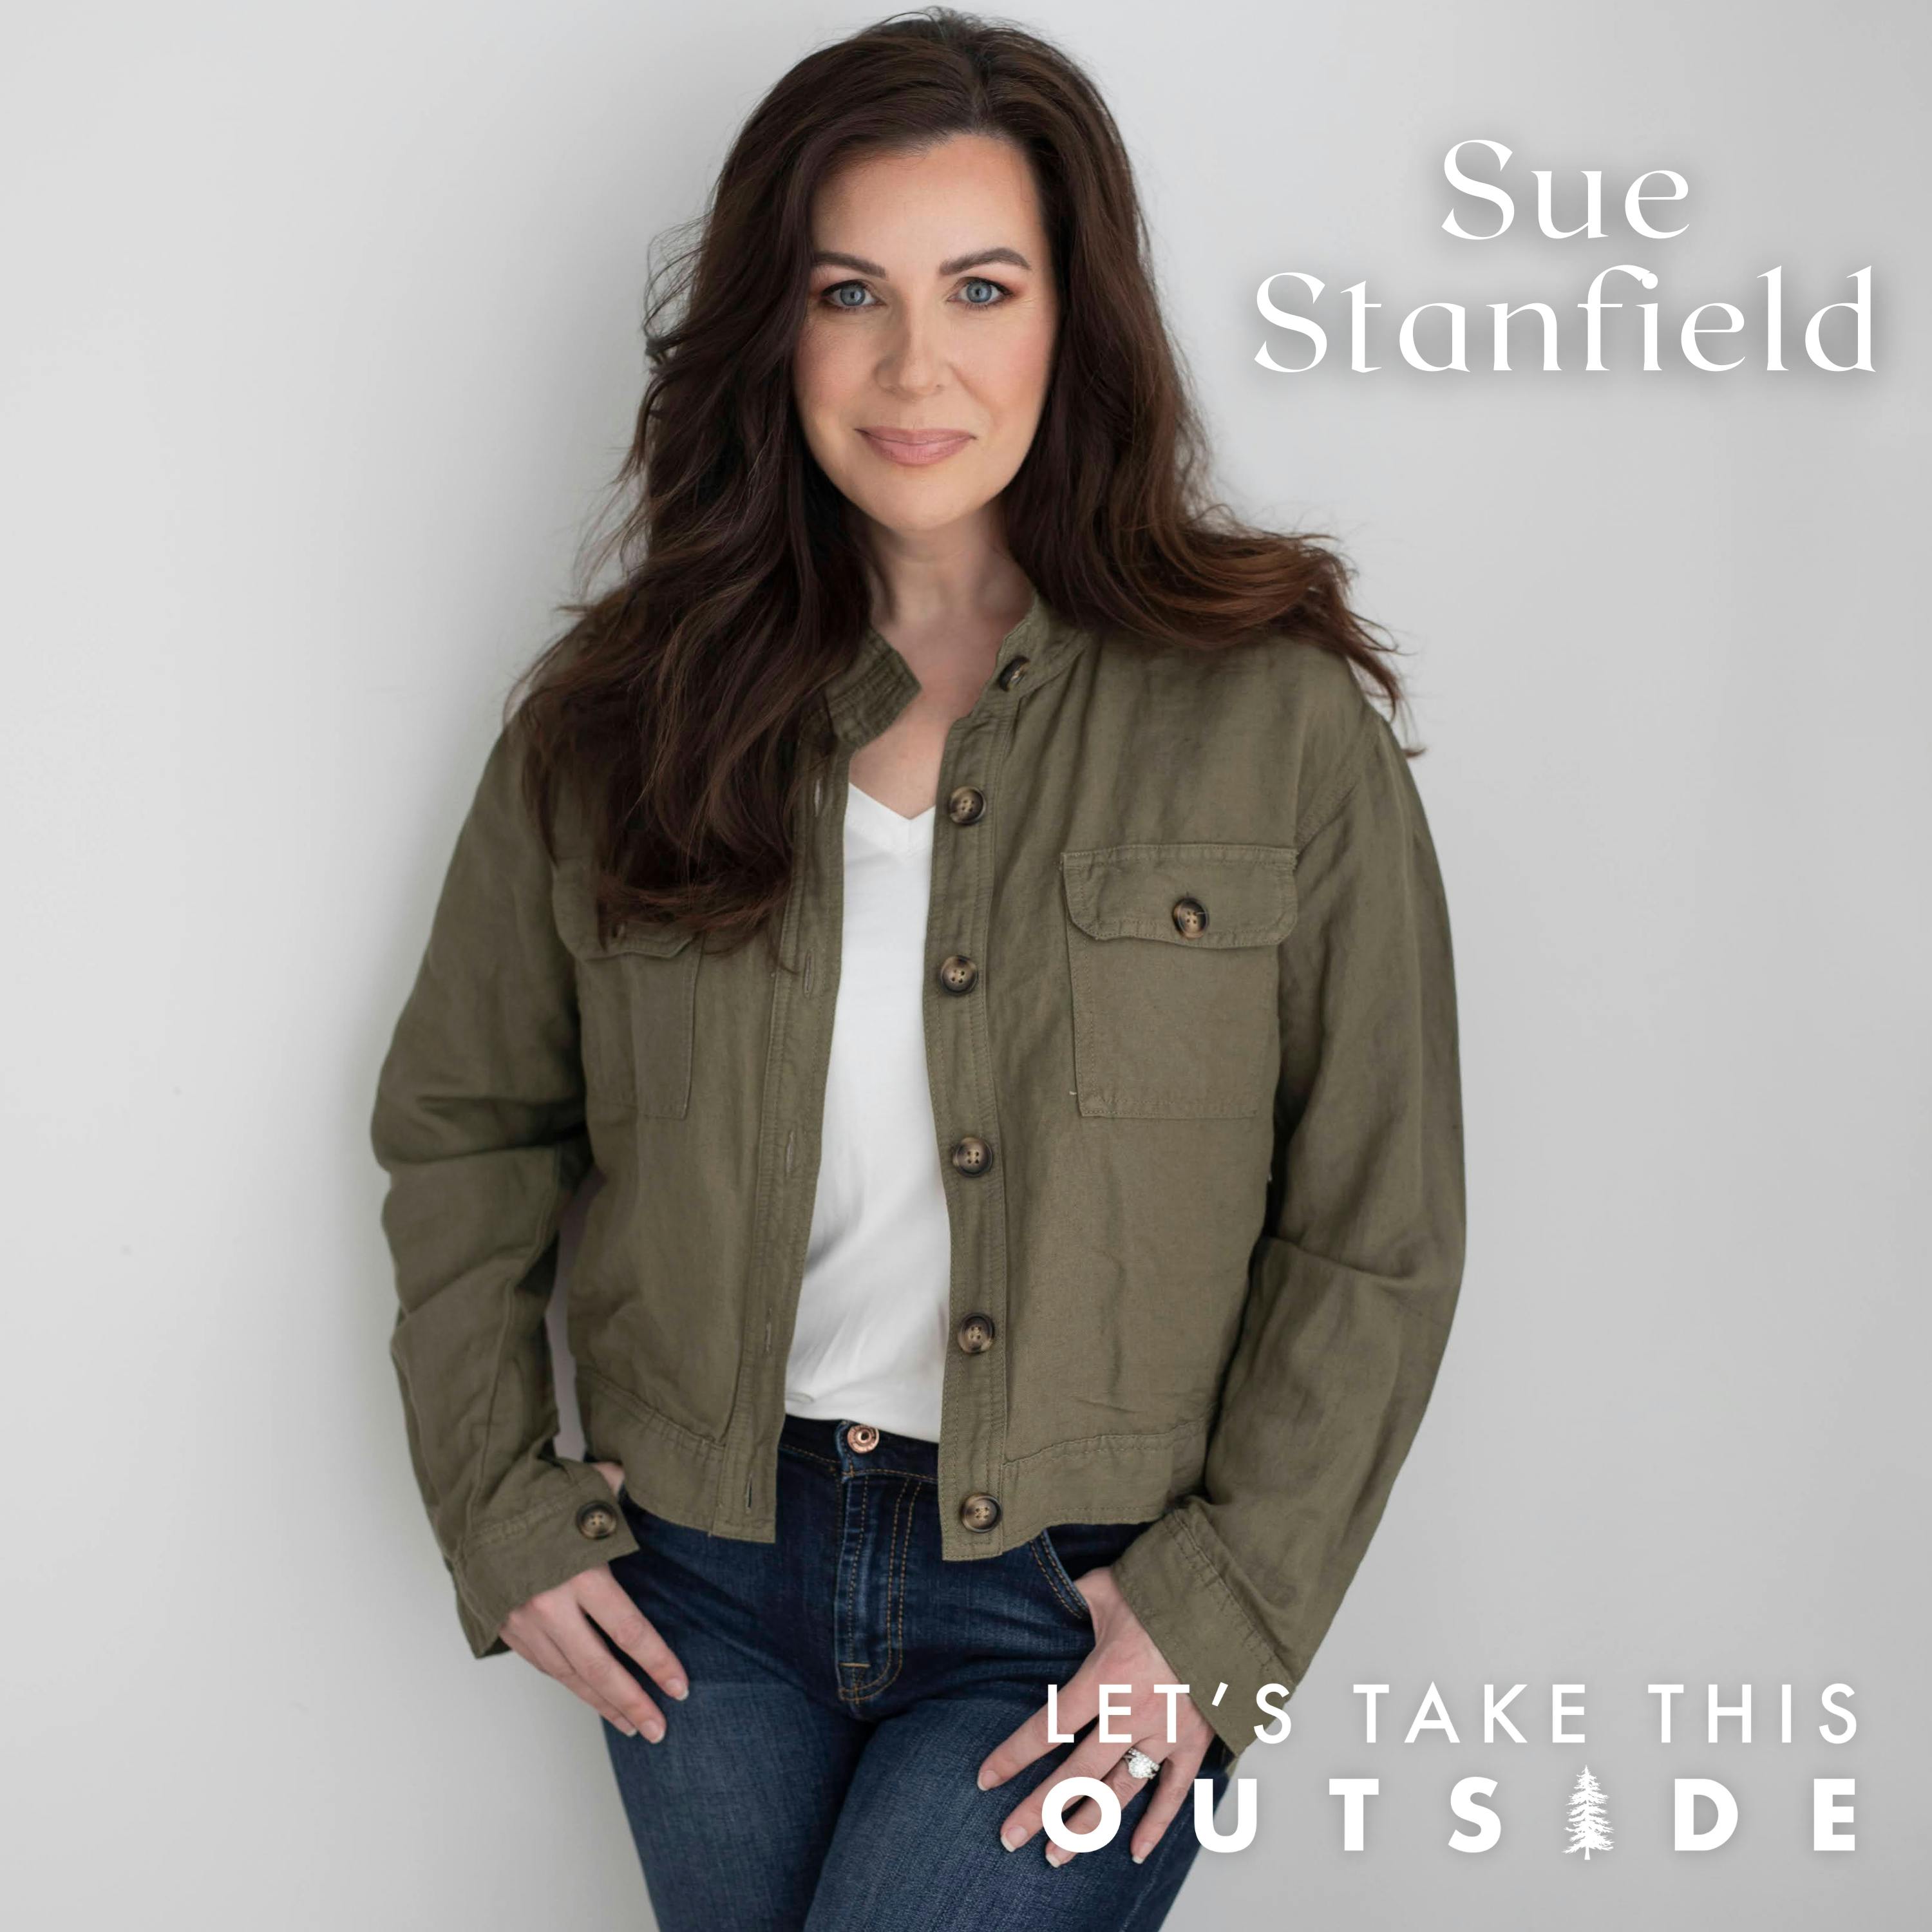 Sue Stanfield - Founder of Take It Outside